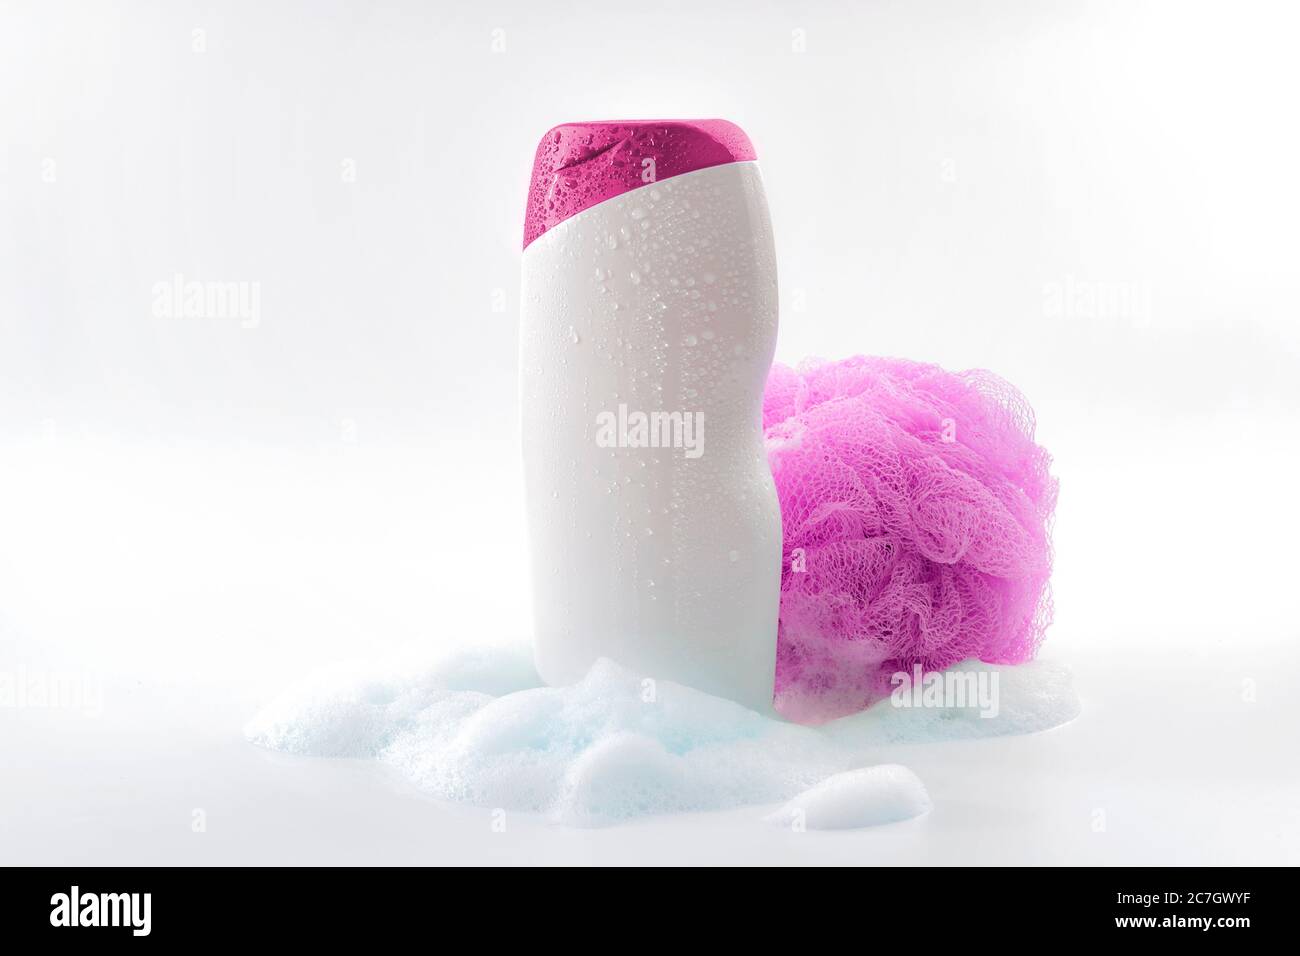 Personal hygiene, daily routine and body care toiletries concept theme with a bottle of shower gel soaked in water drops, bubbles made by soap foam an Stock Photo